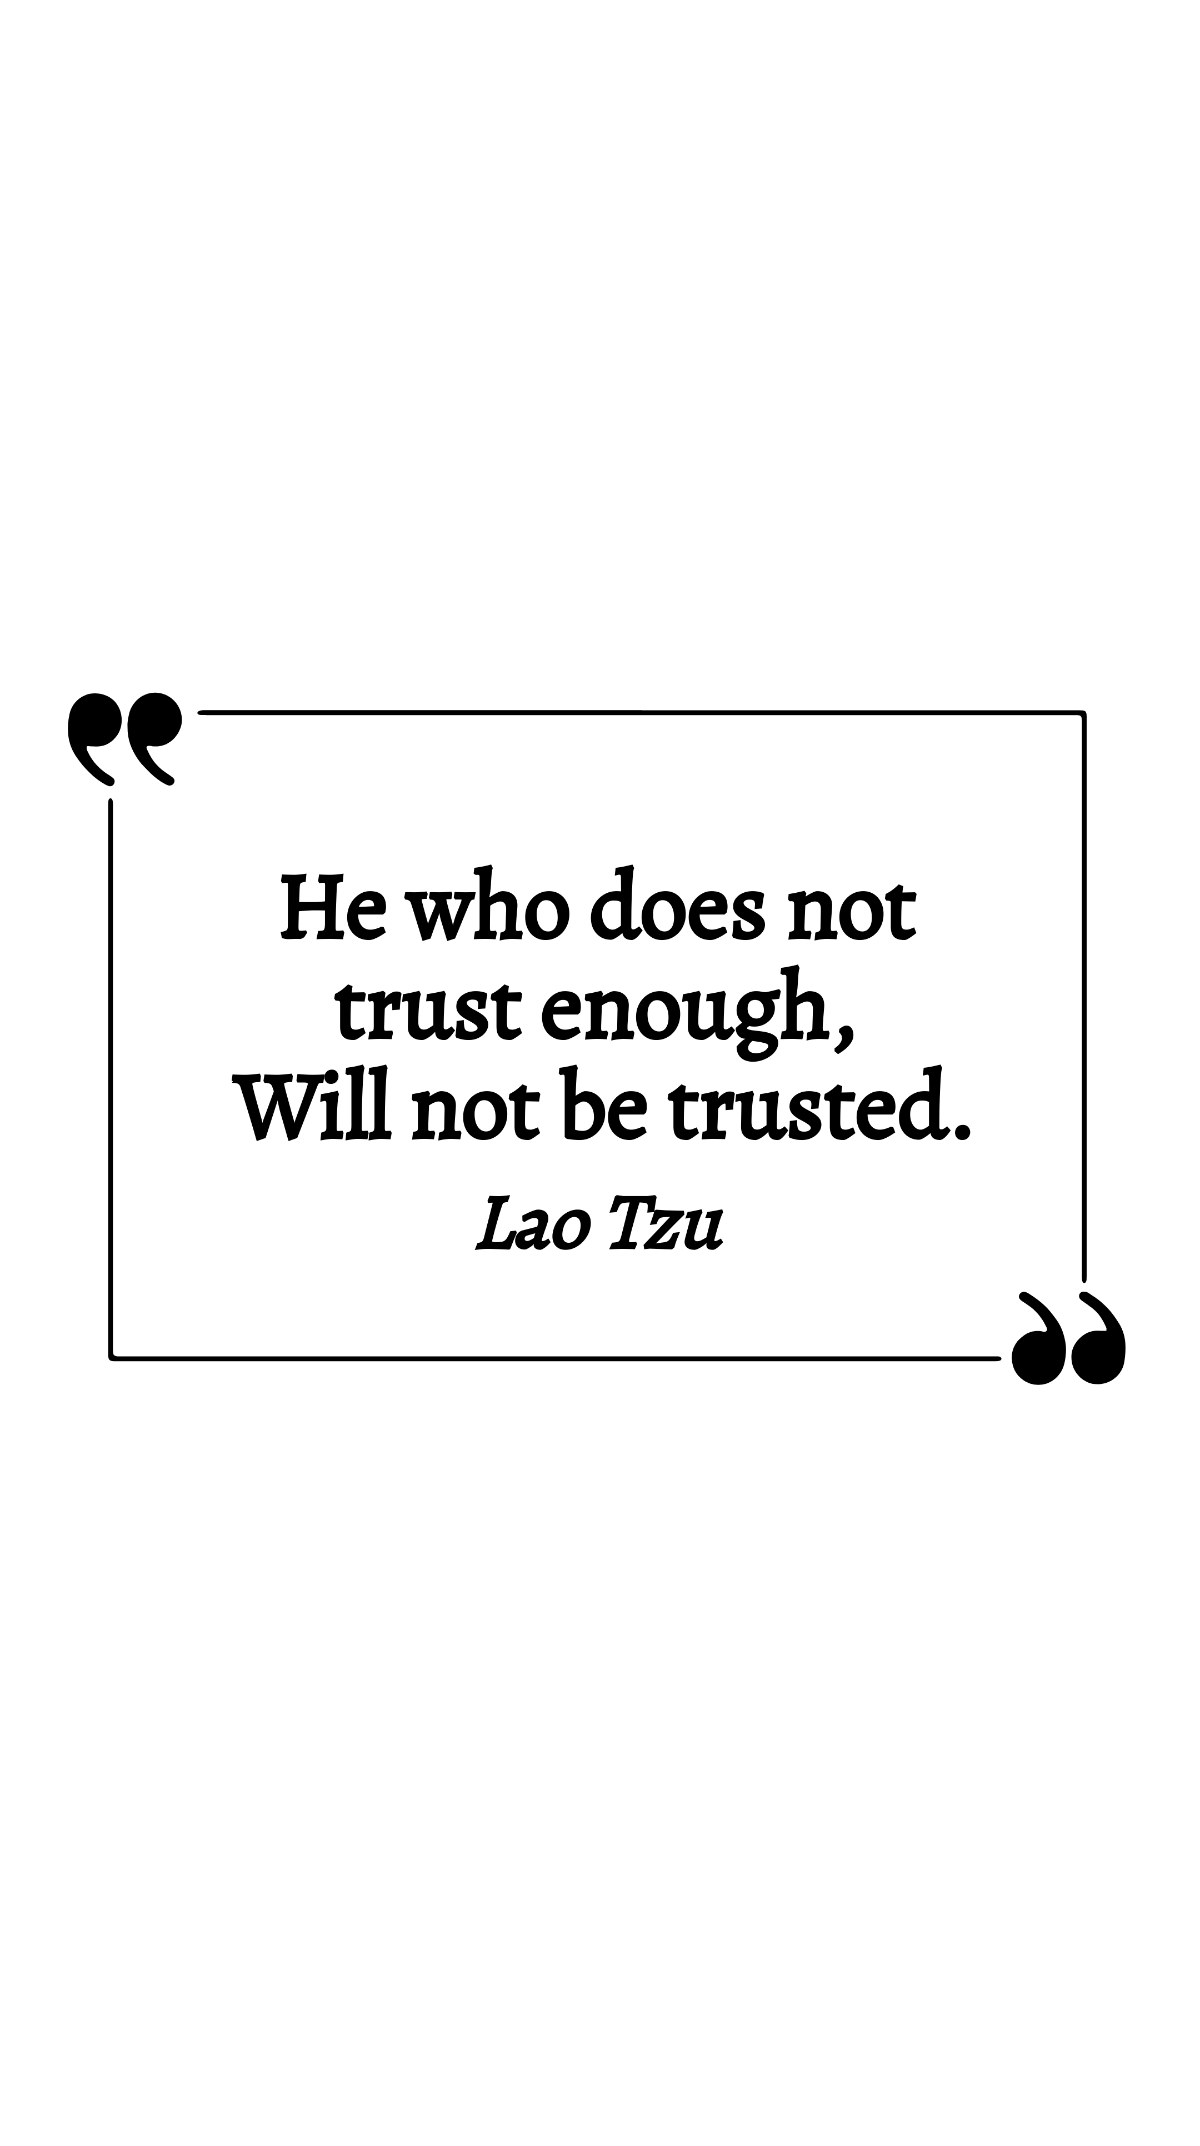 Lao Tzu - He who does not trust enough, Will not be trusted.